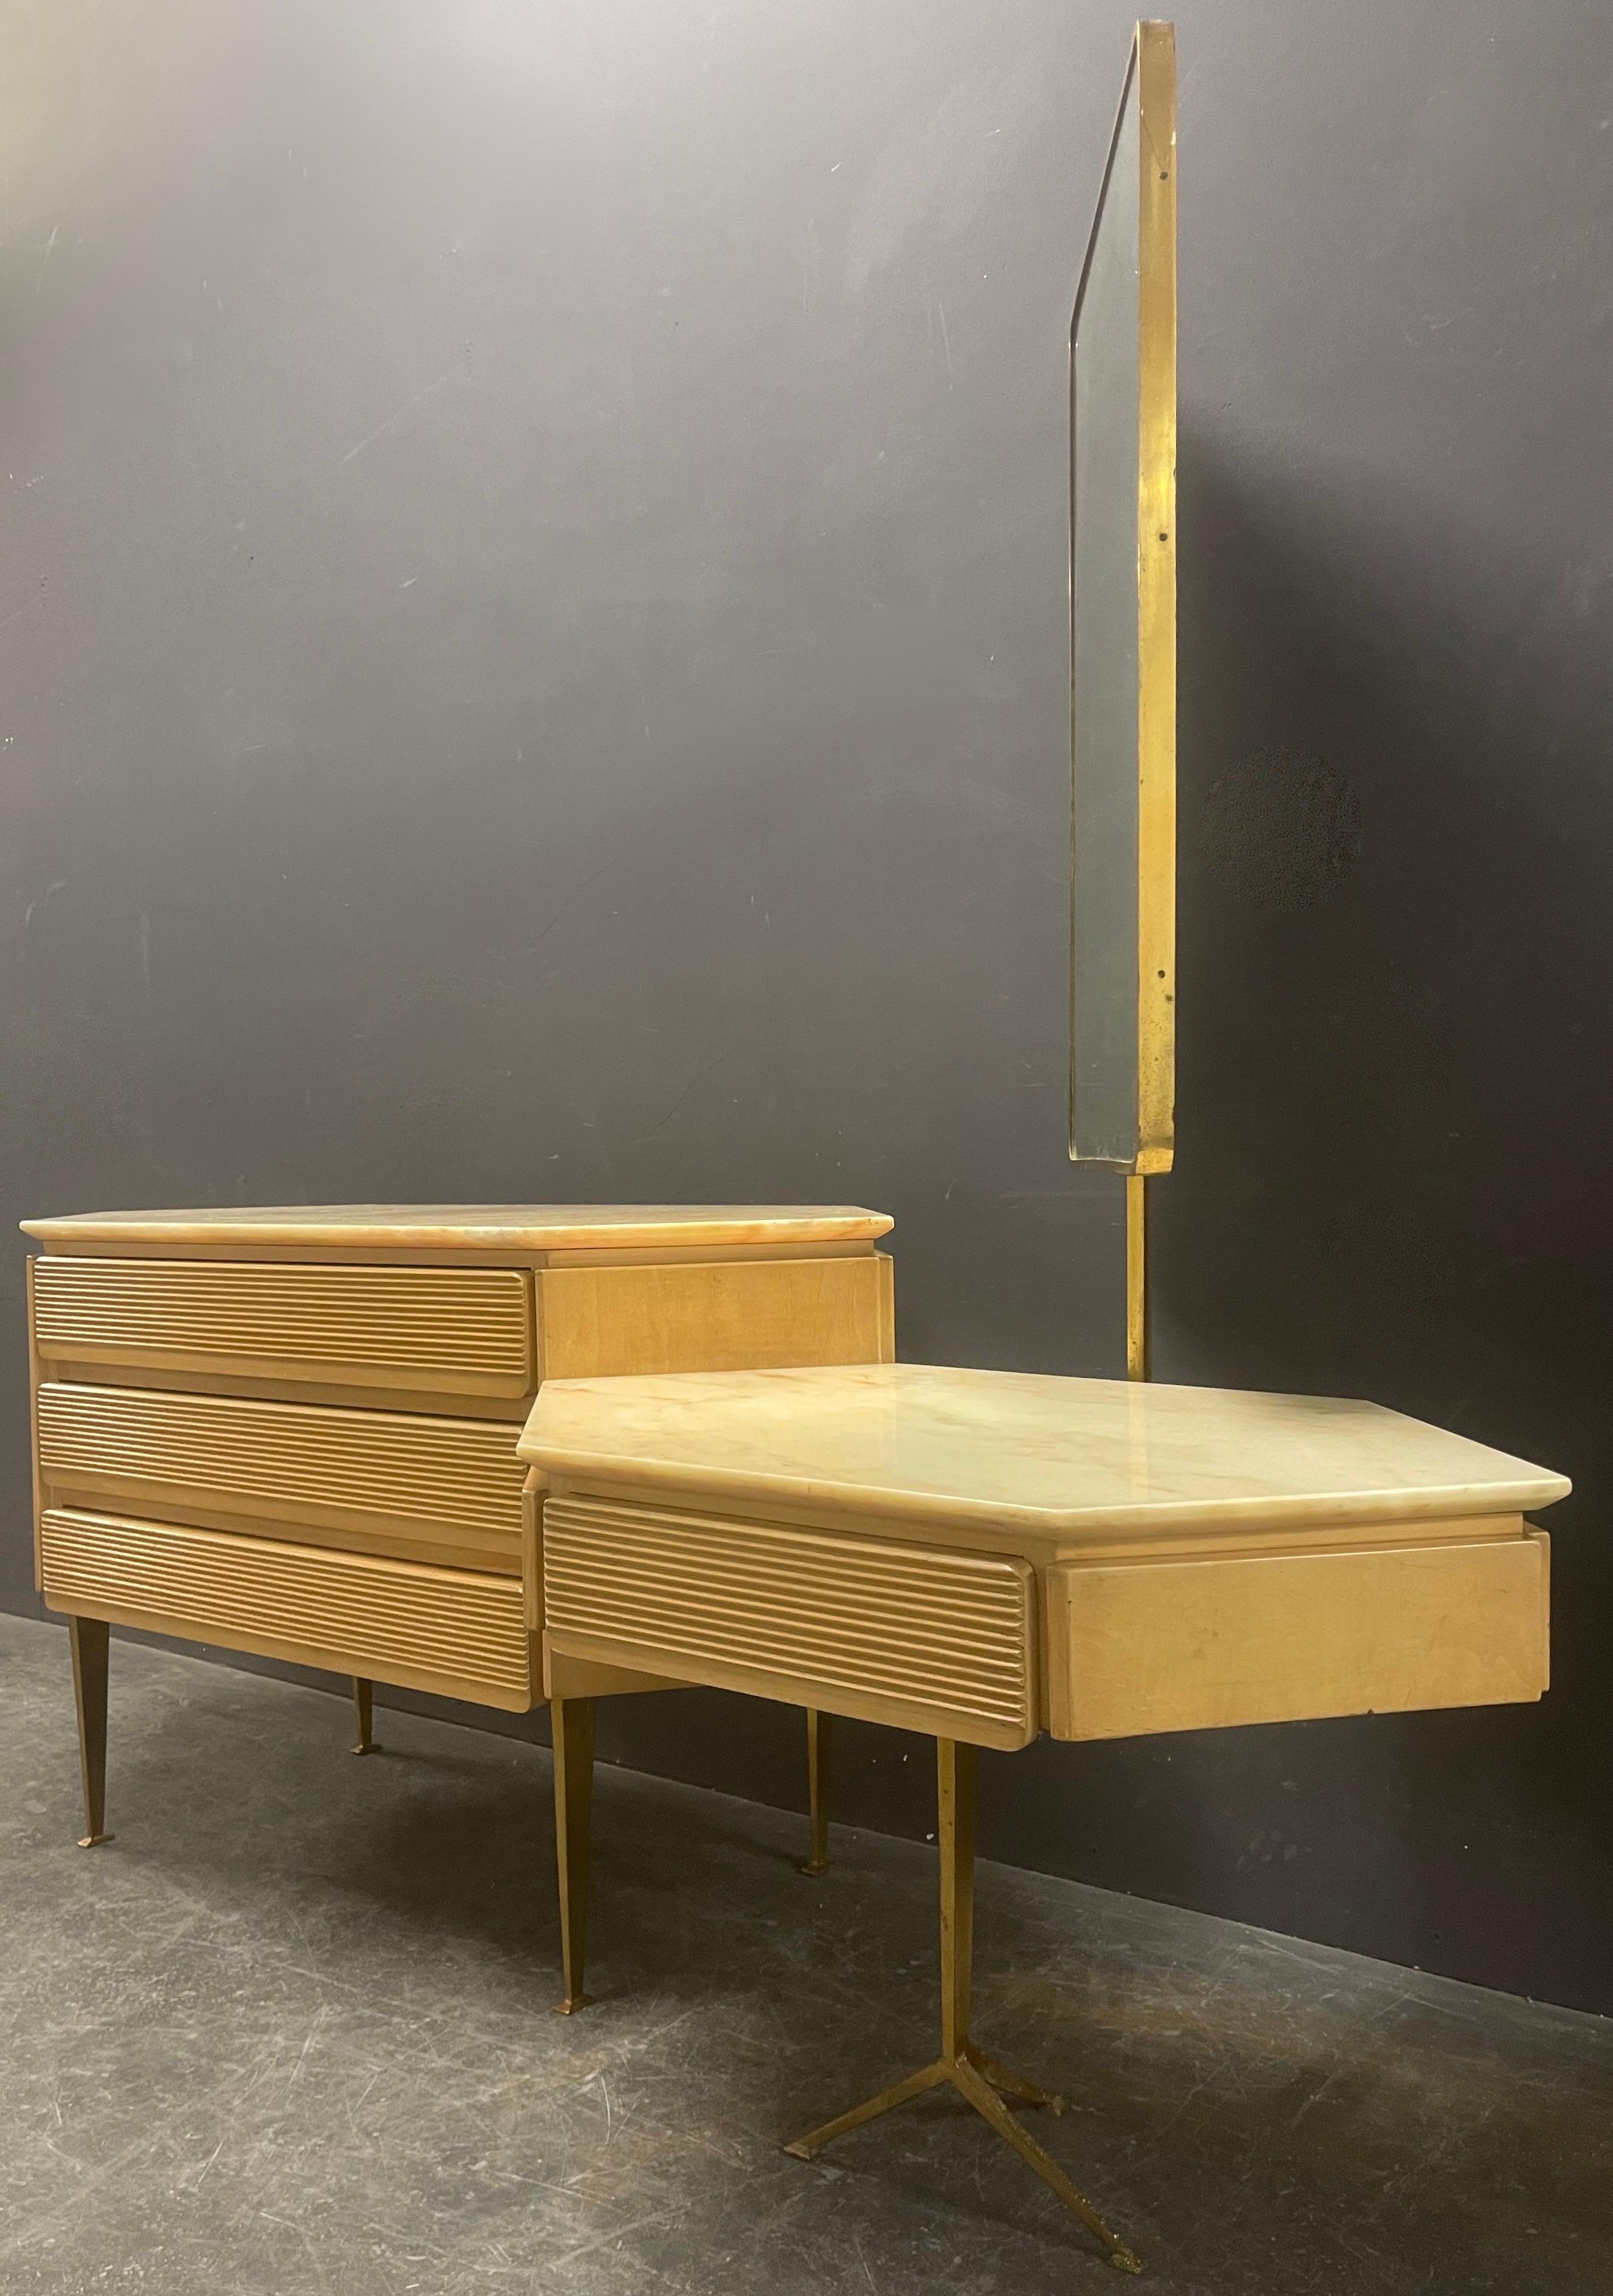 we are very happy and proud to present this outstanding rare and wonderful - possibly unique - piece of furniture. purchase from an italien estate at lake como - full of wonderful pieces by the great designer gio ponti. the grandparents of the owner